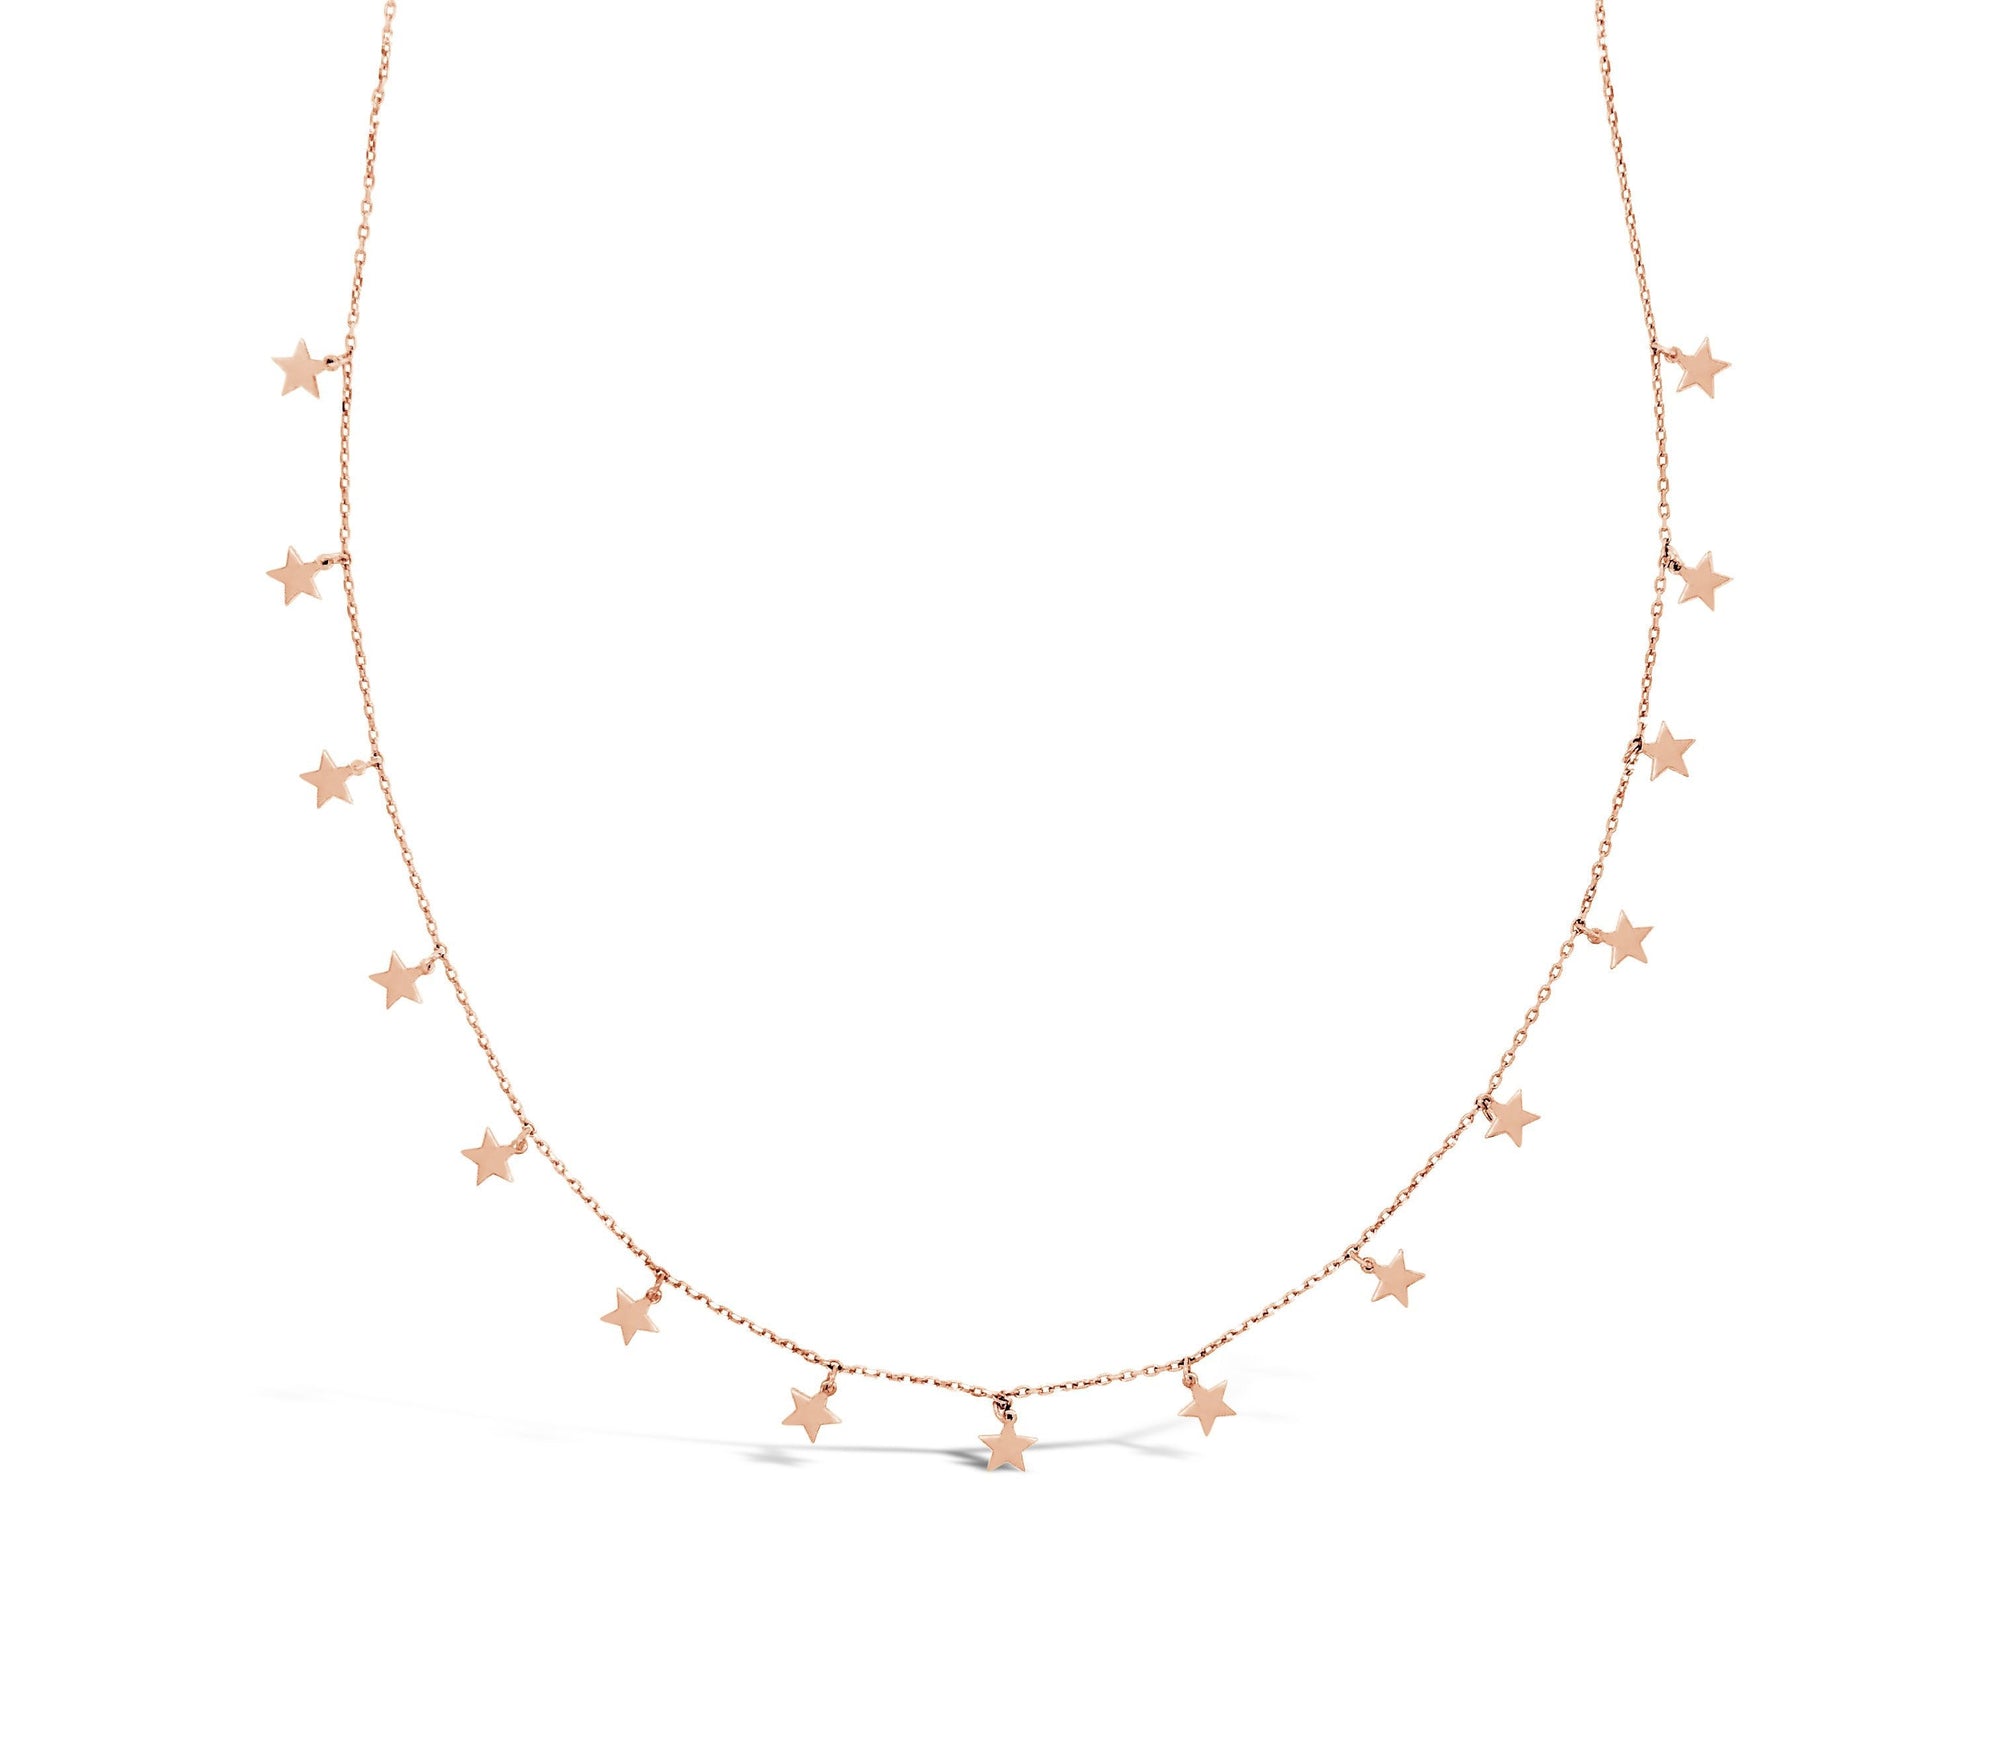 Duo Jewellery Necklaces Duo Make A Wish Necklace (Rose Gold Plated)